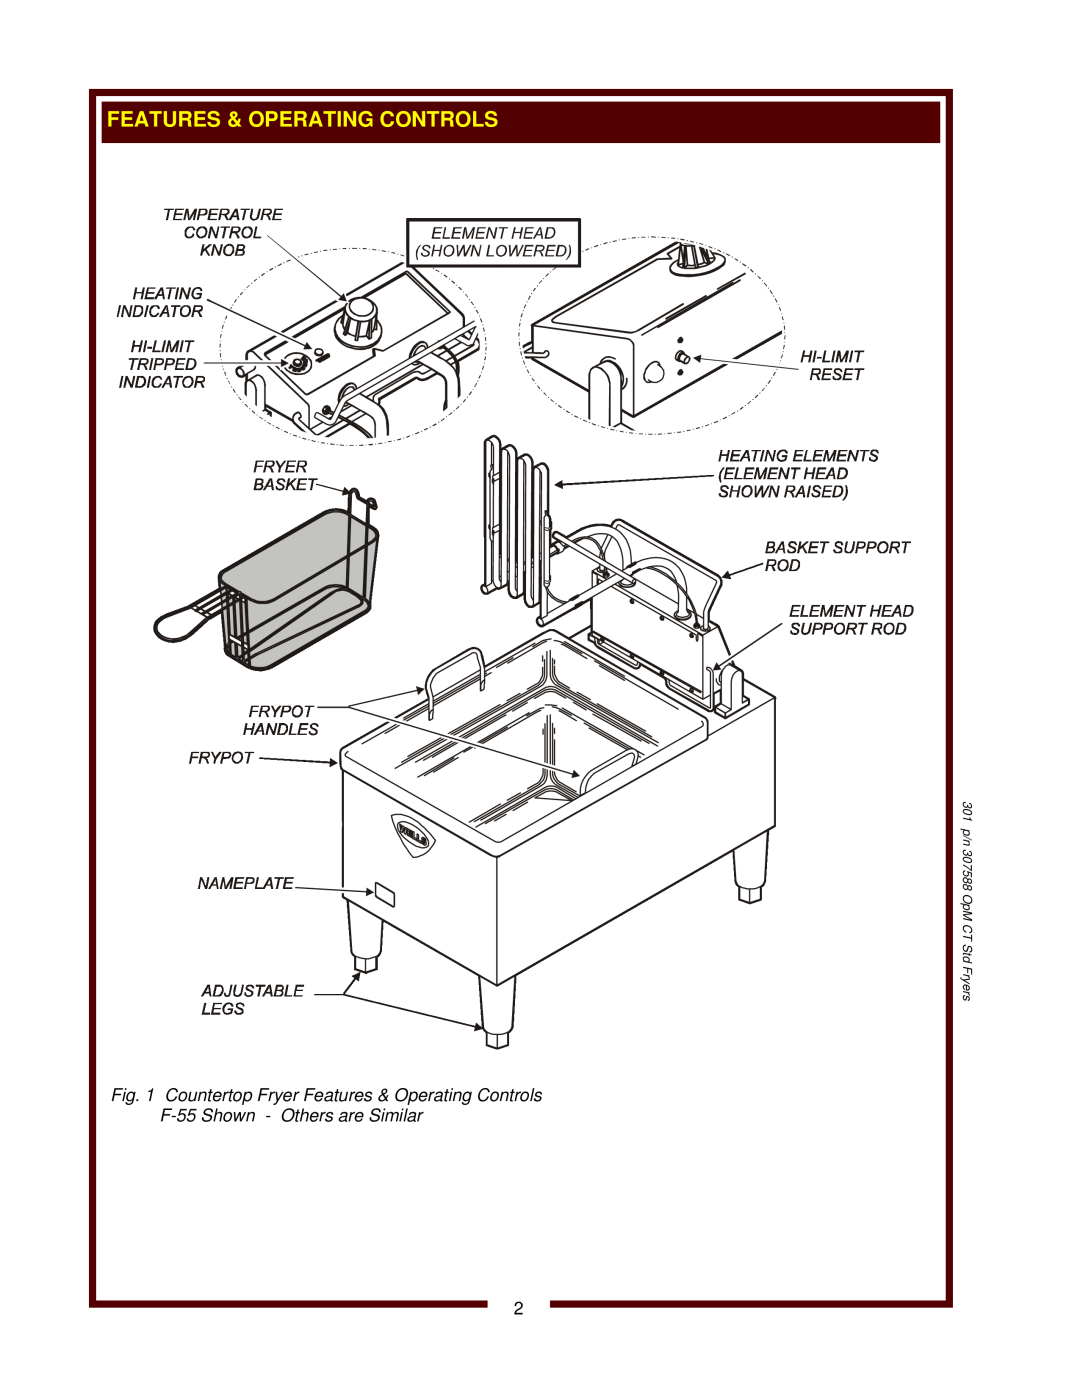 Wells F-14 operation manual Countertop Fryer Features & Operating Controls, F-55 Shown - Others are Similar 